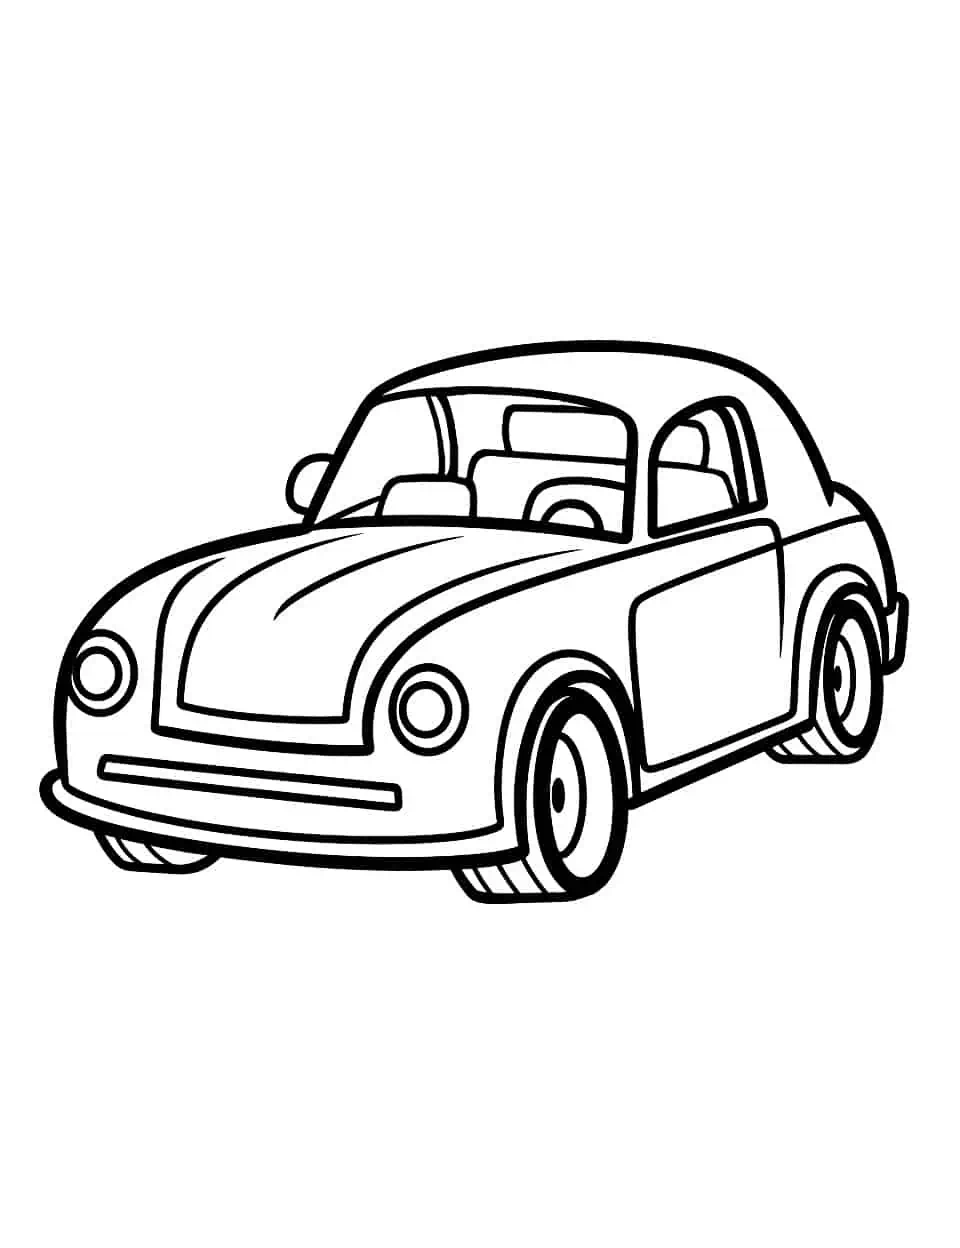 Simple Car Coloring Page - A simple car design for younger kids or beginners just learning to color.